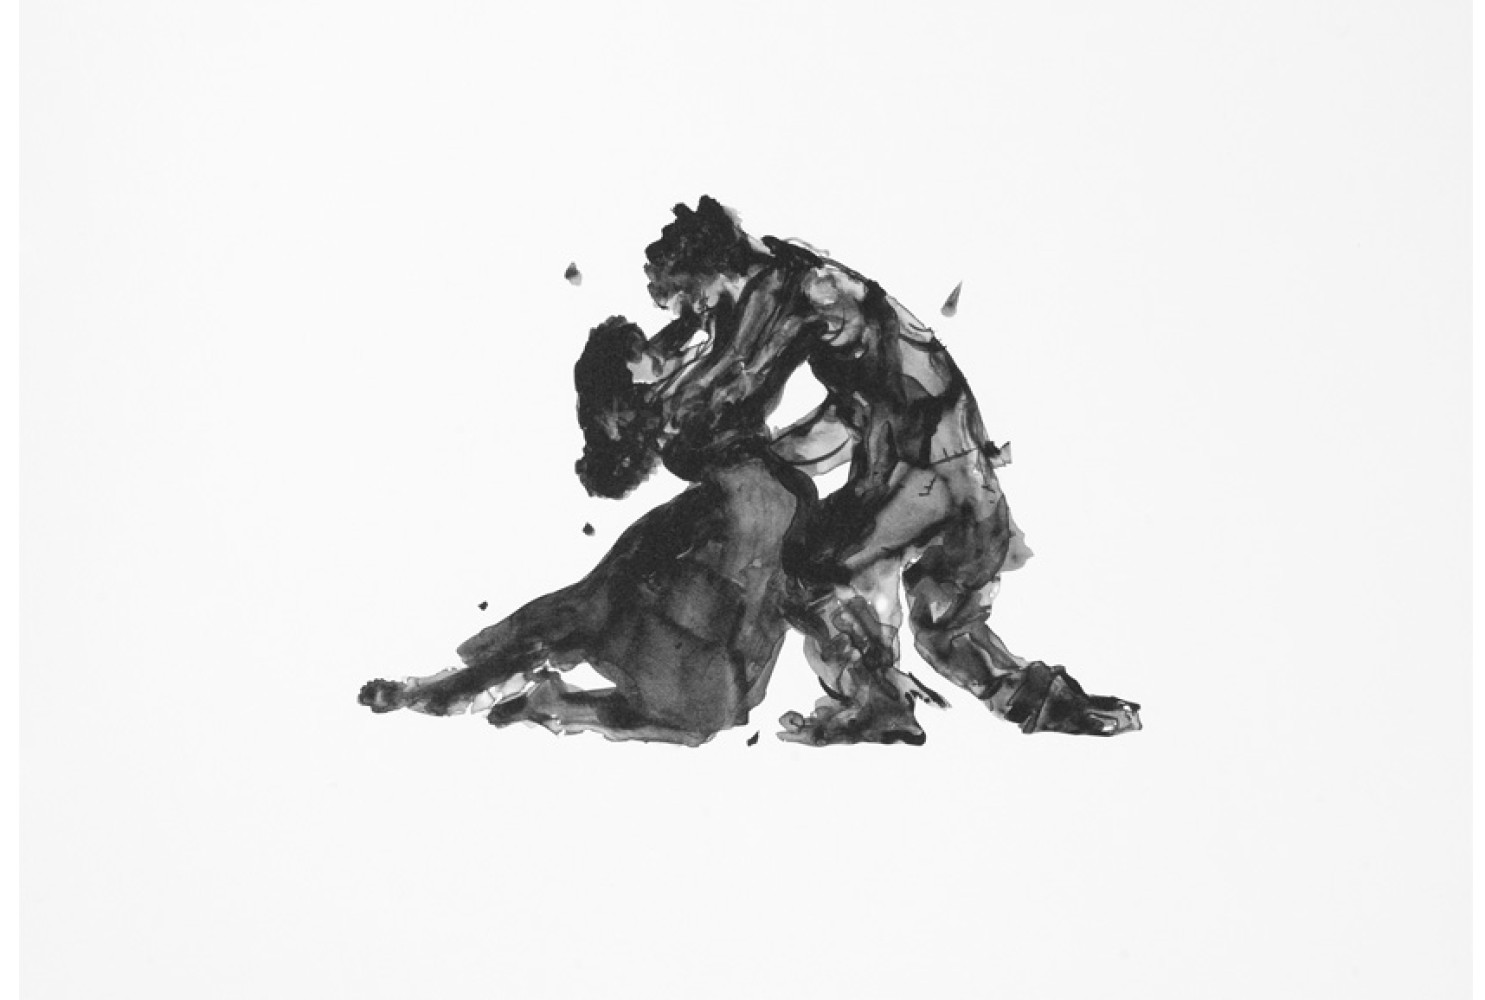 Porgy and Bess, Embracing, 2013, by Kara Walker (American, b. 1969); lithograph on paper; 15 x 18 inches; Museum purchase; 2015.005.0005